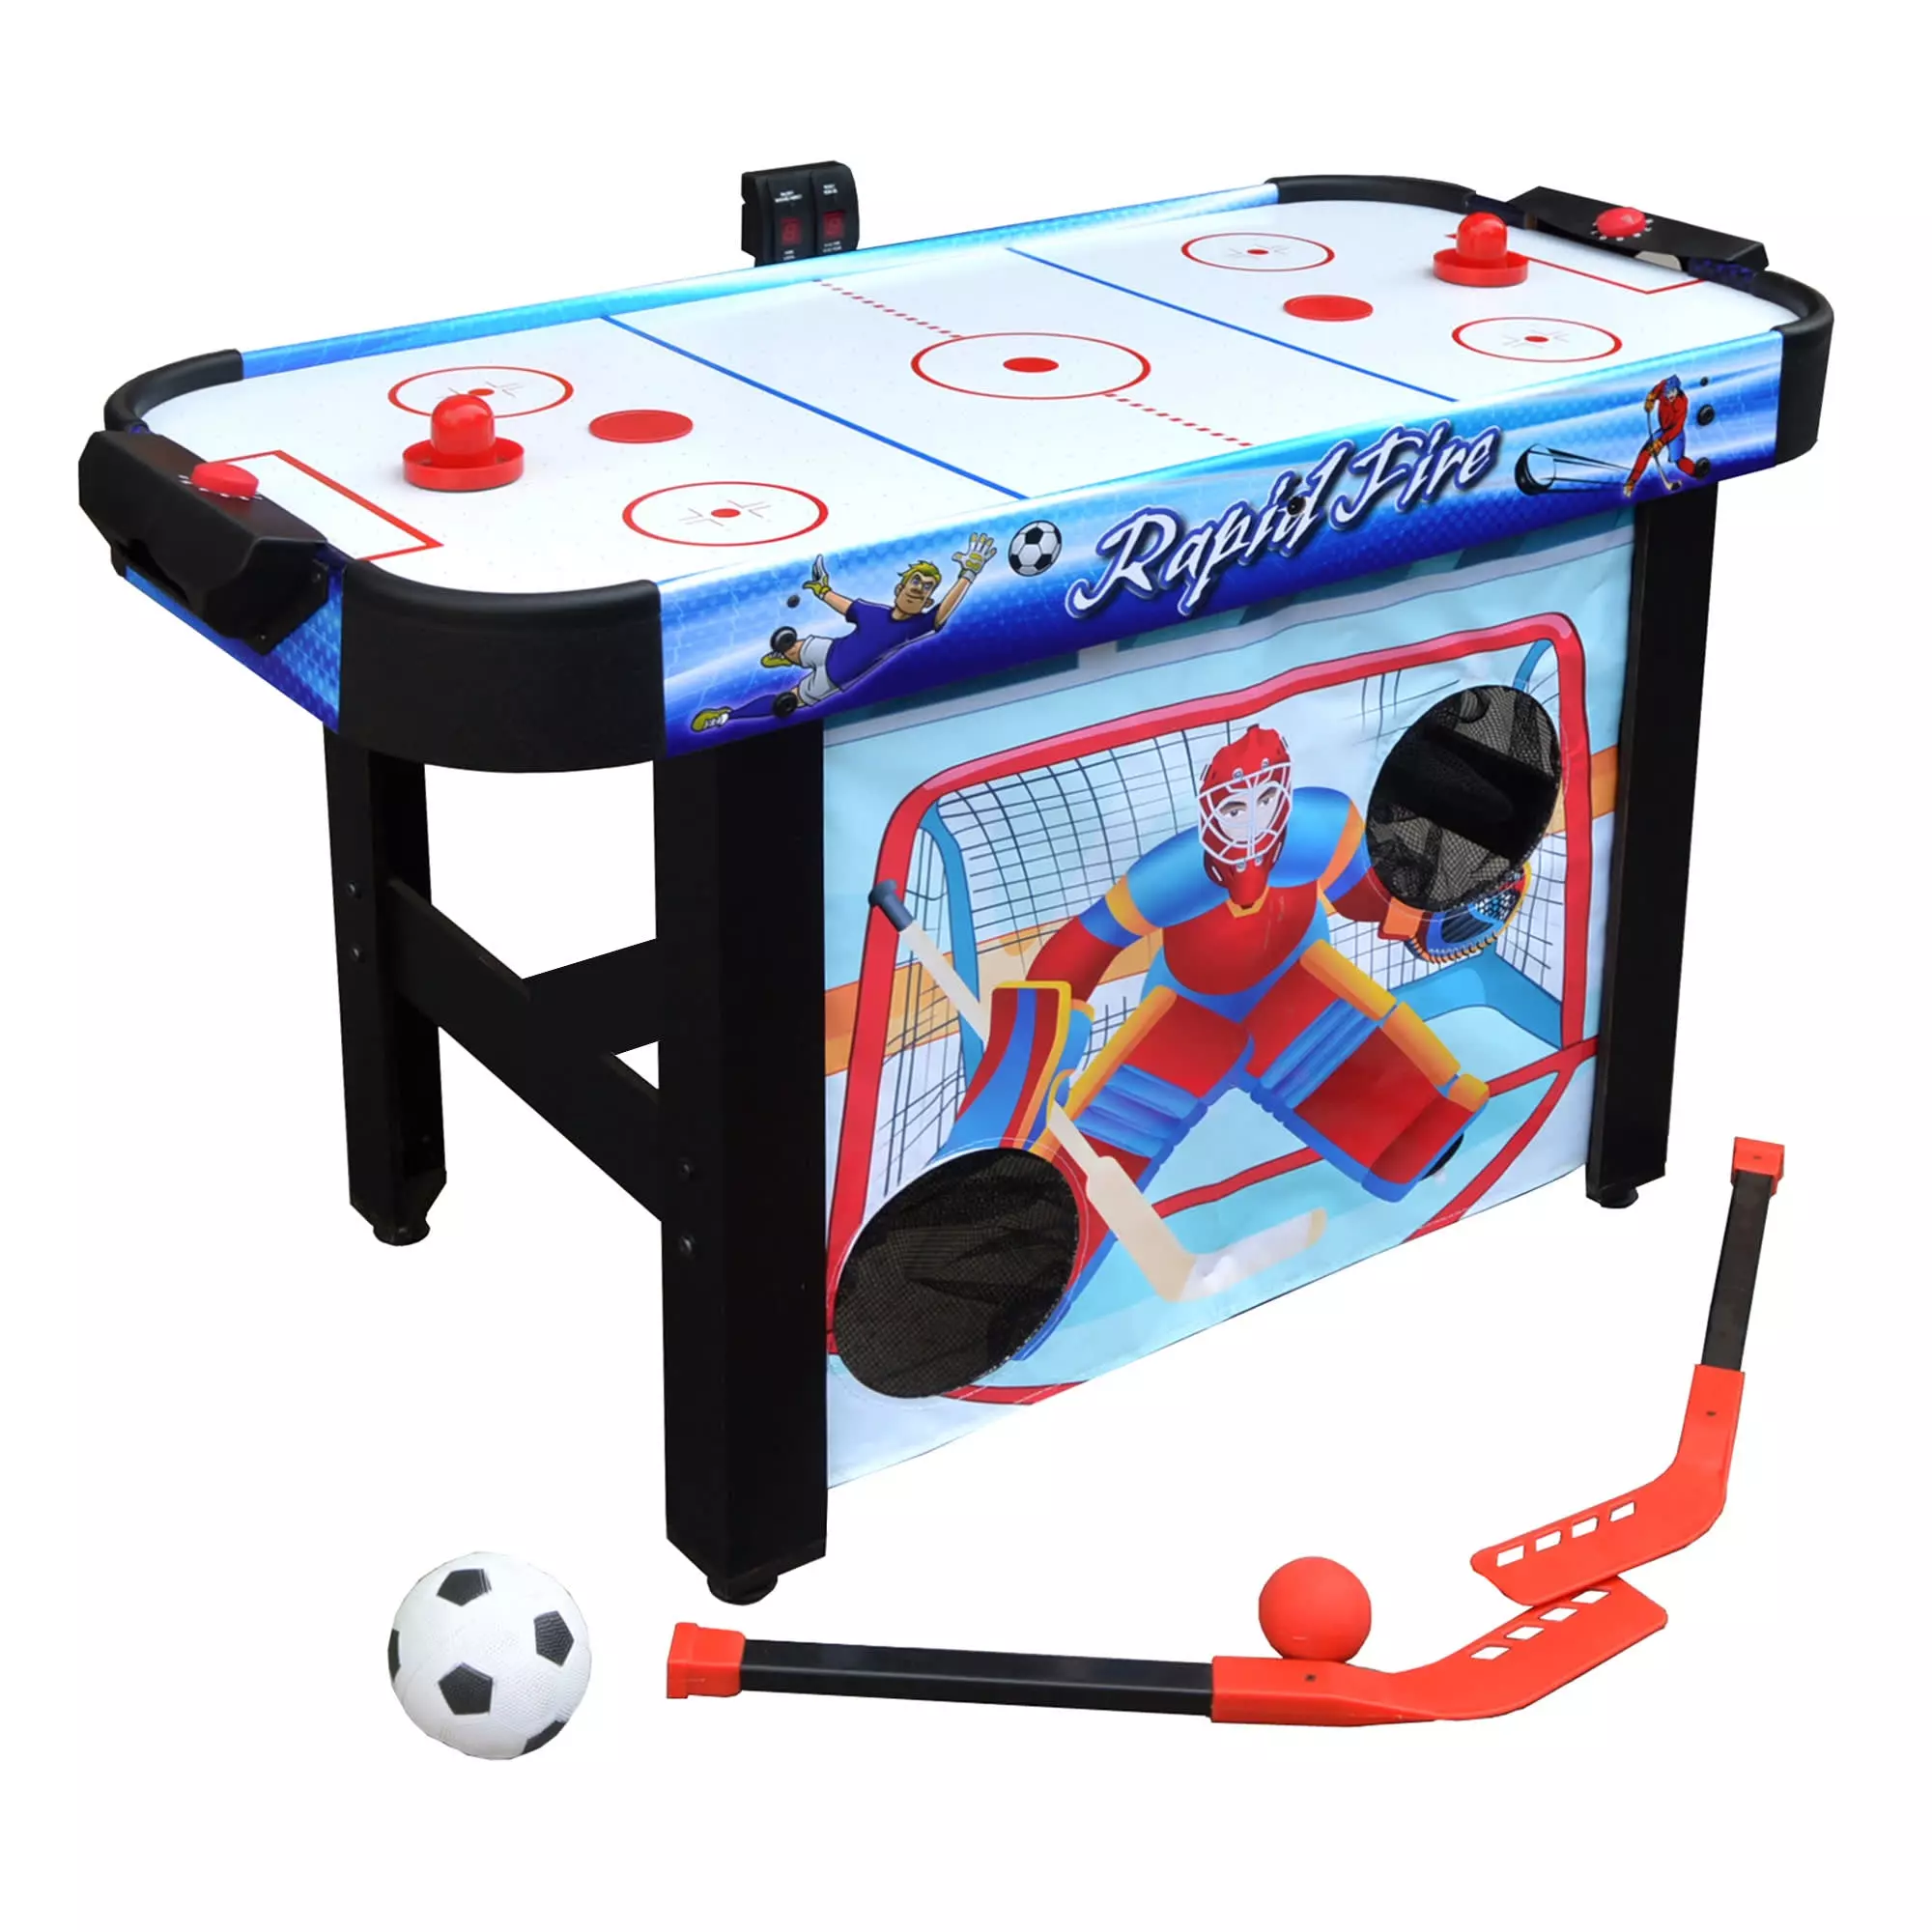 11 Best Air Hockey Tables For Kids Reviews and Buyers Guide, 2023